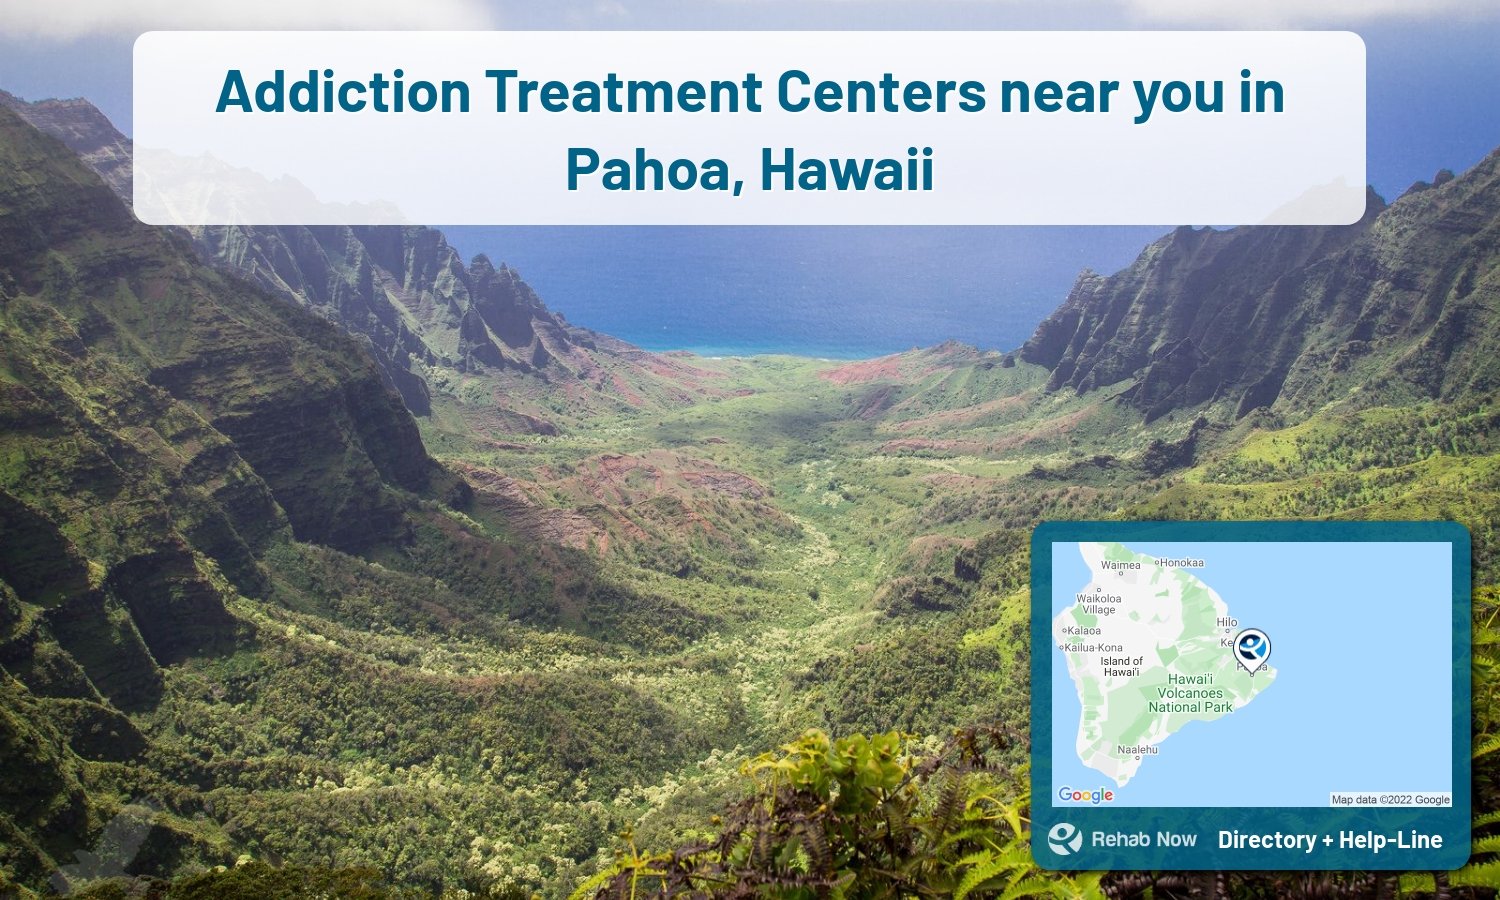 Pahoa, HI Treatment Centers. Find drug rehab in Pahoa, Hawaii, or detox and treatment programs. Get the right help now!